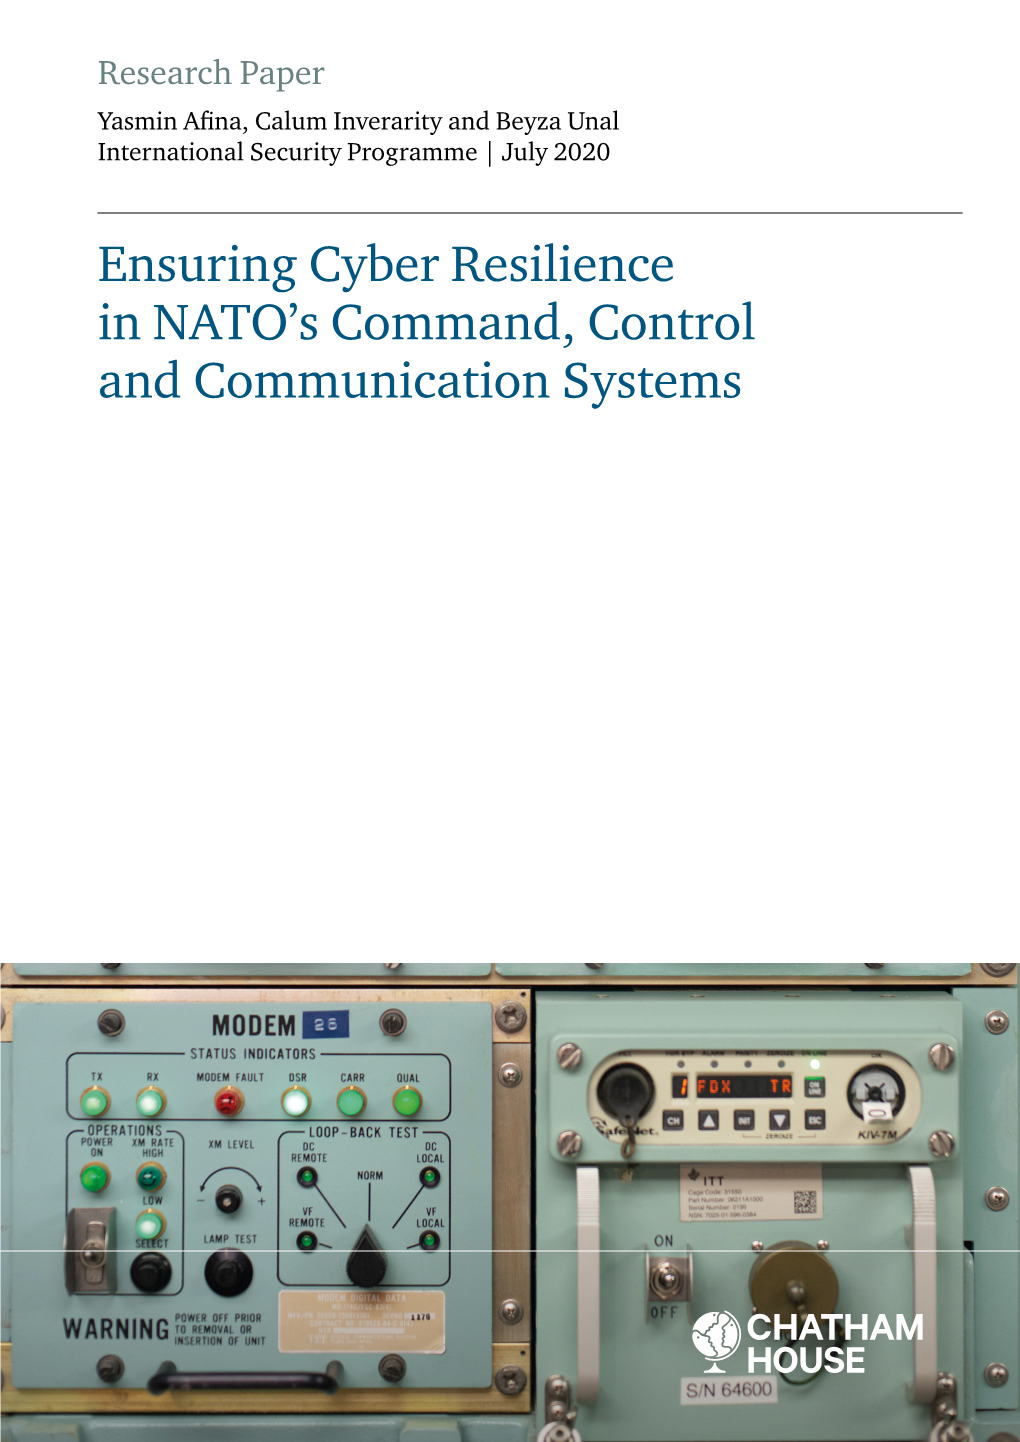 Ensuring Cyber Resilience in NATO's Command, Control And